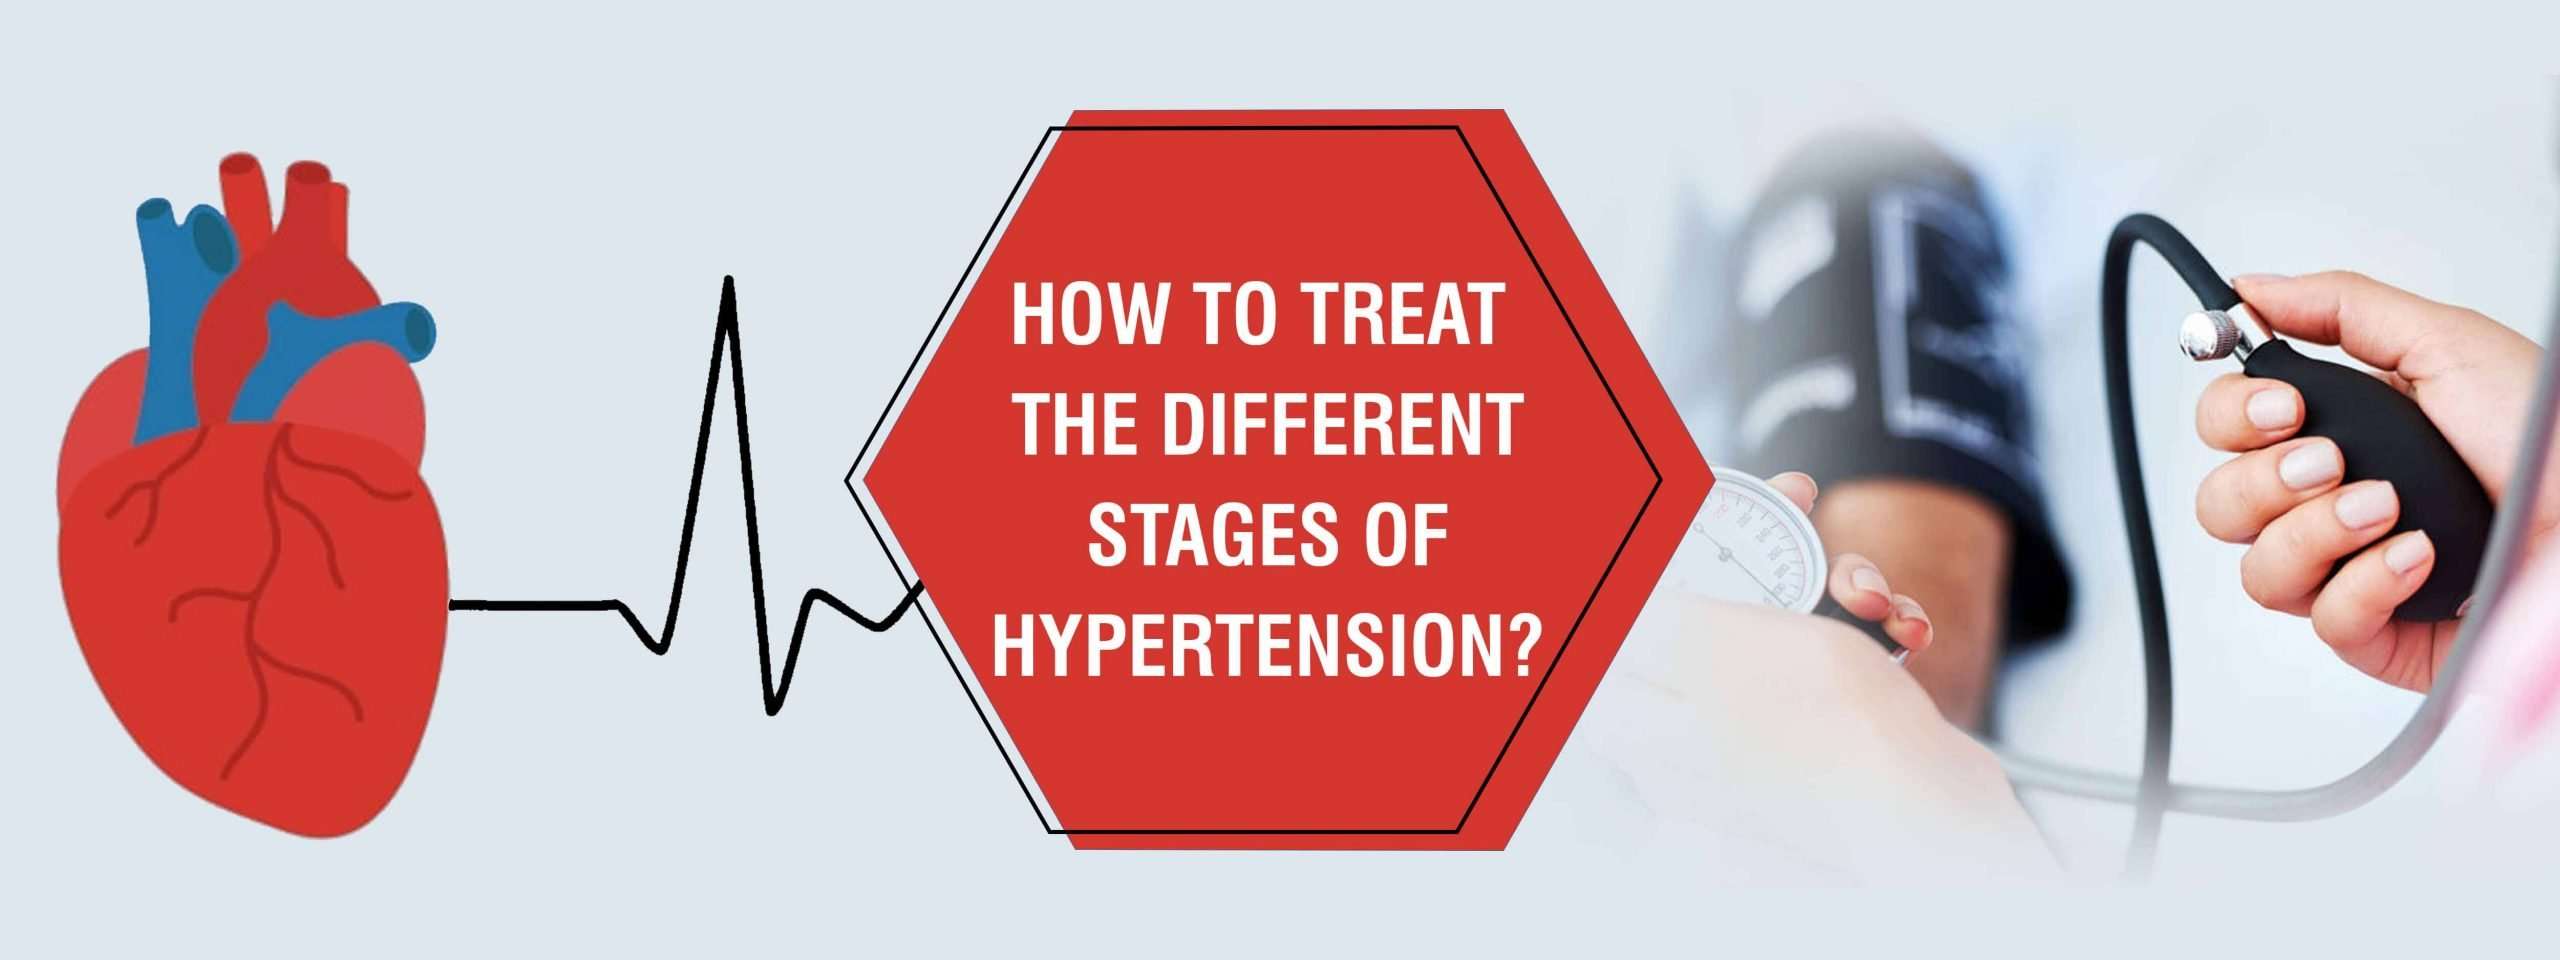 How to treat the different stages of hypertension